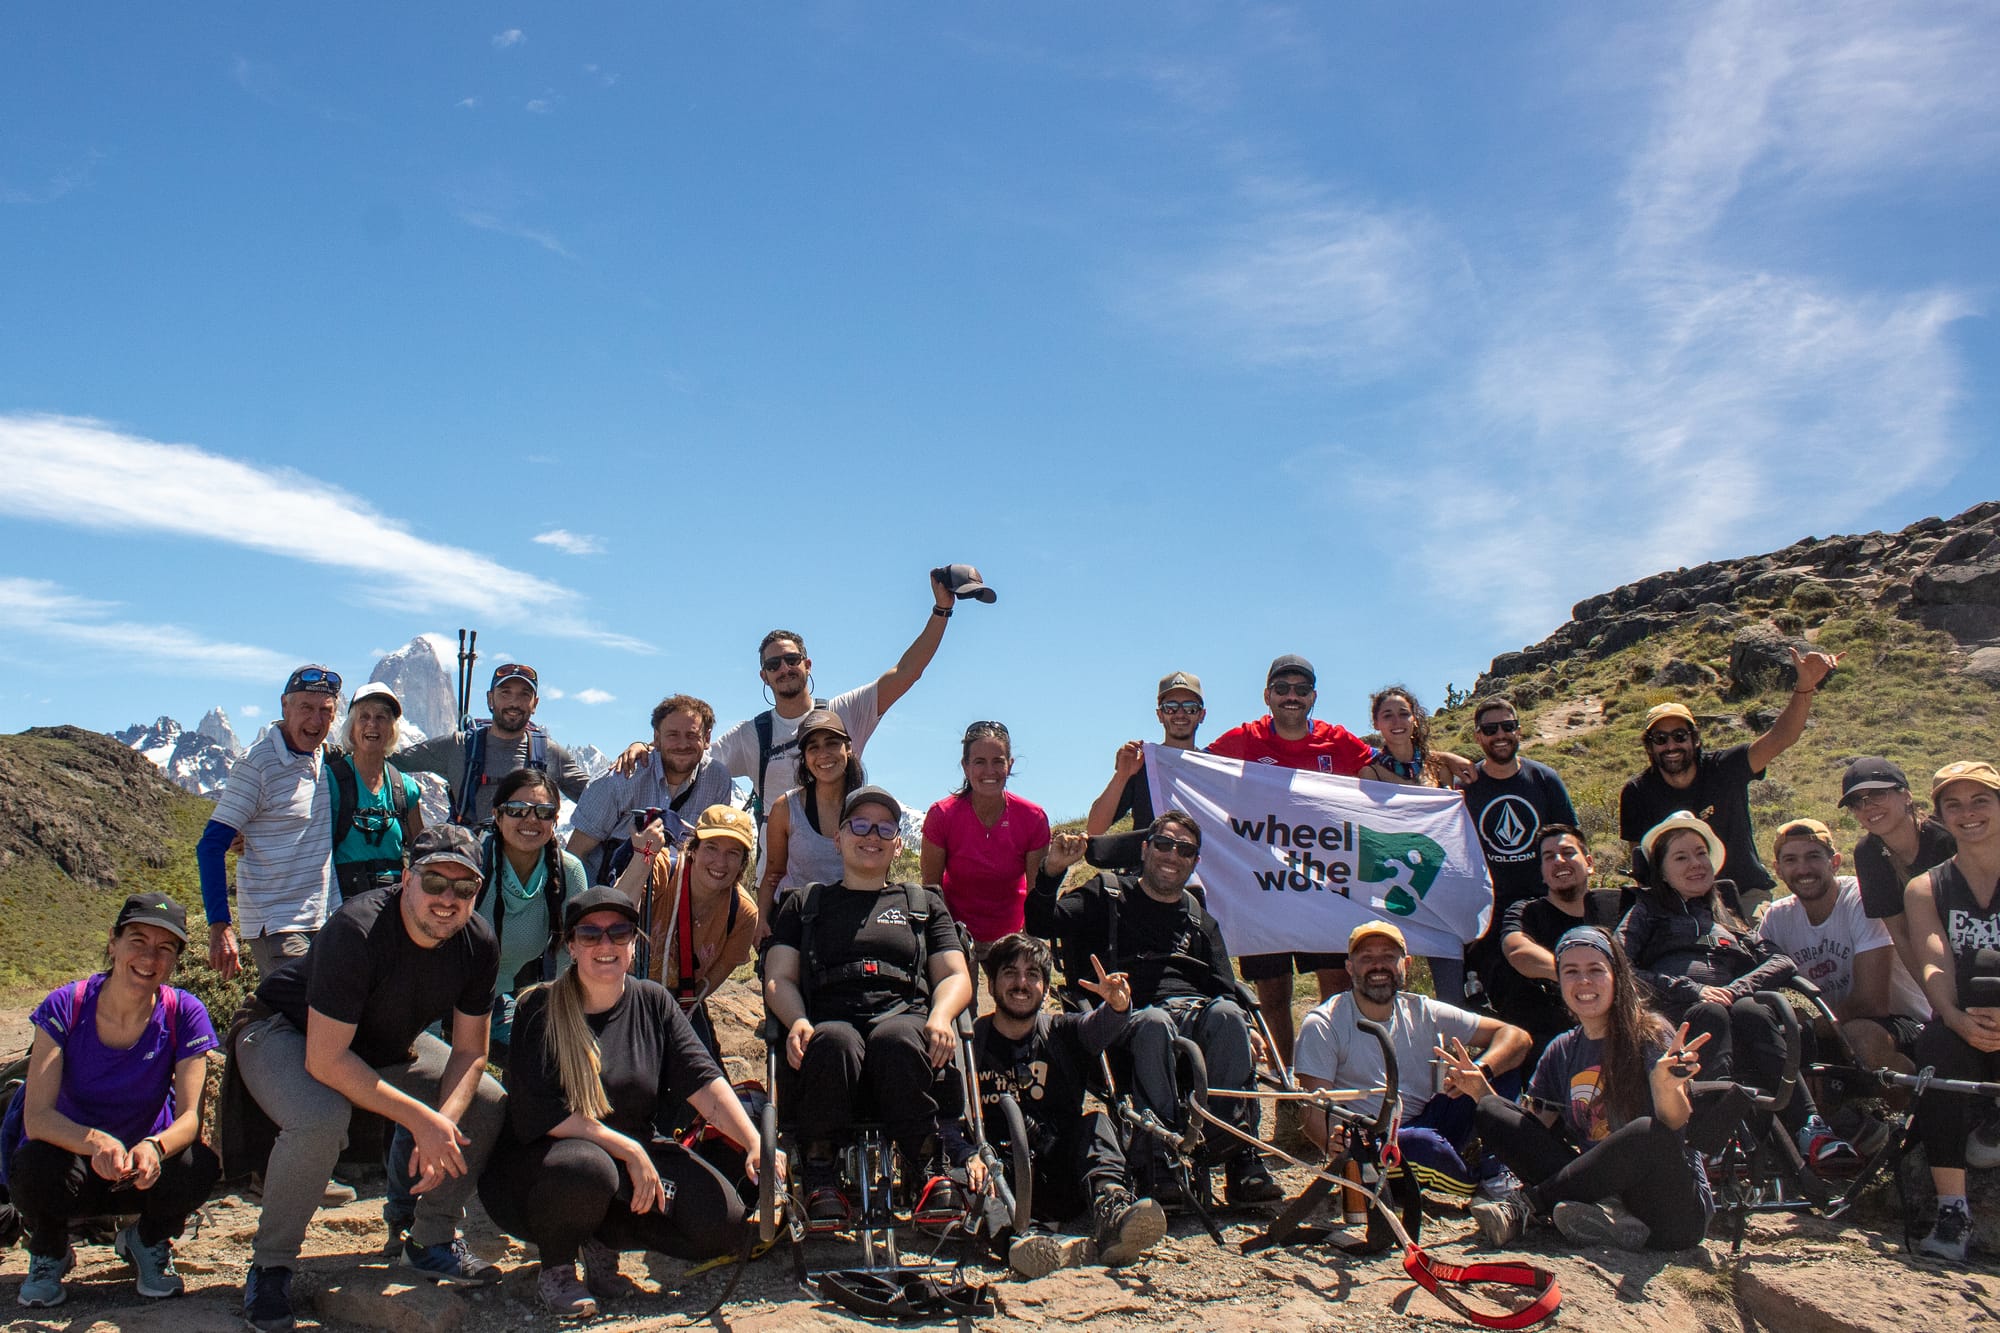 Group photo of the Wheel the World team hiking in Patagonia. Wheelchair users in joelette wheelchairs